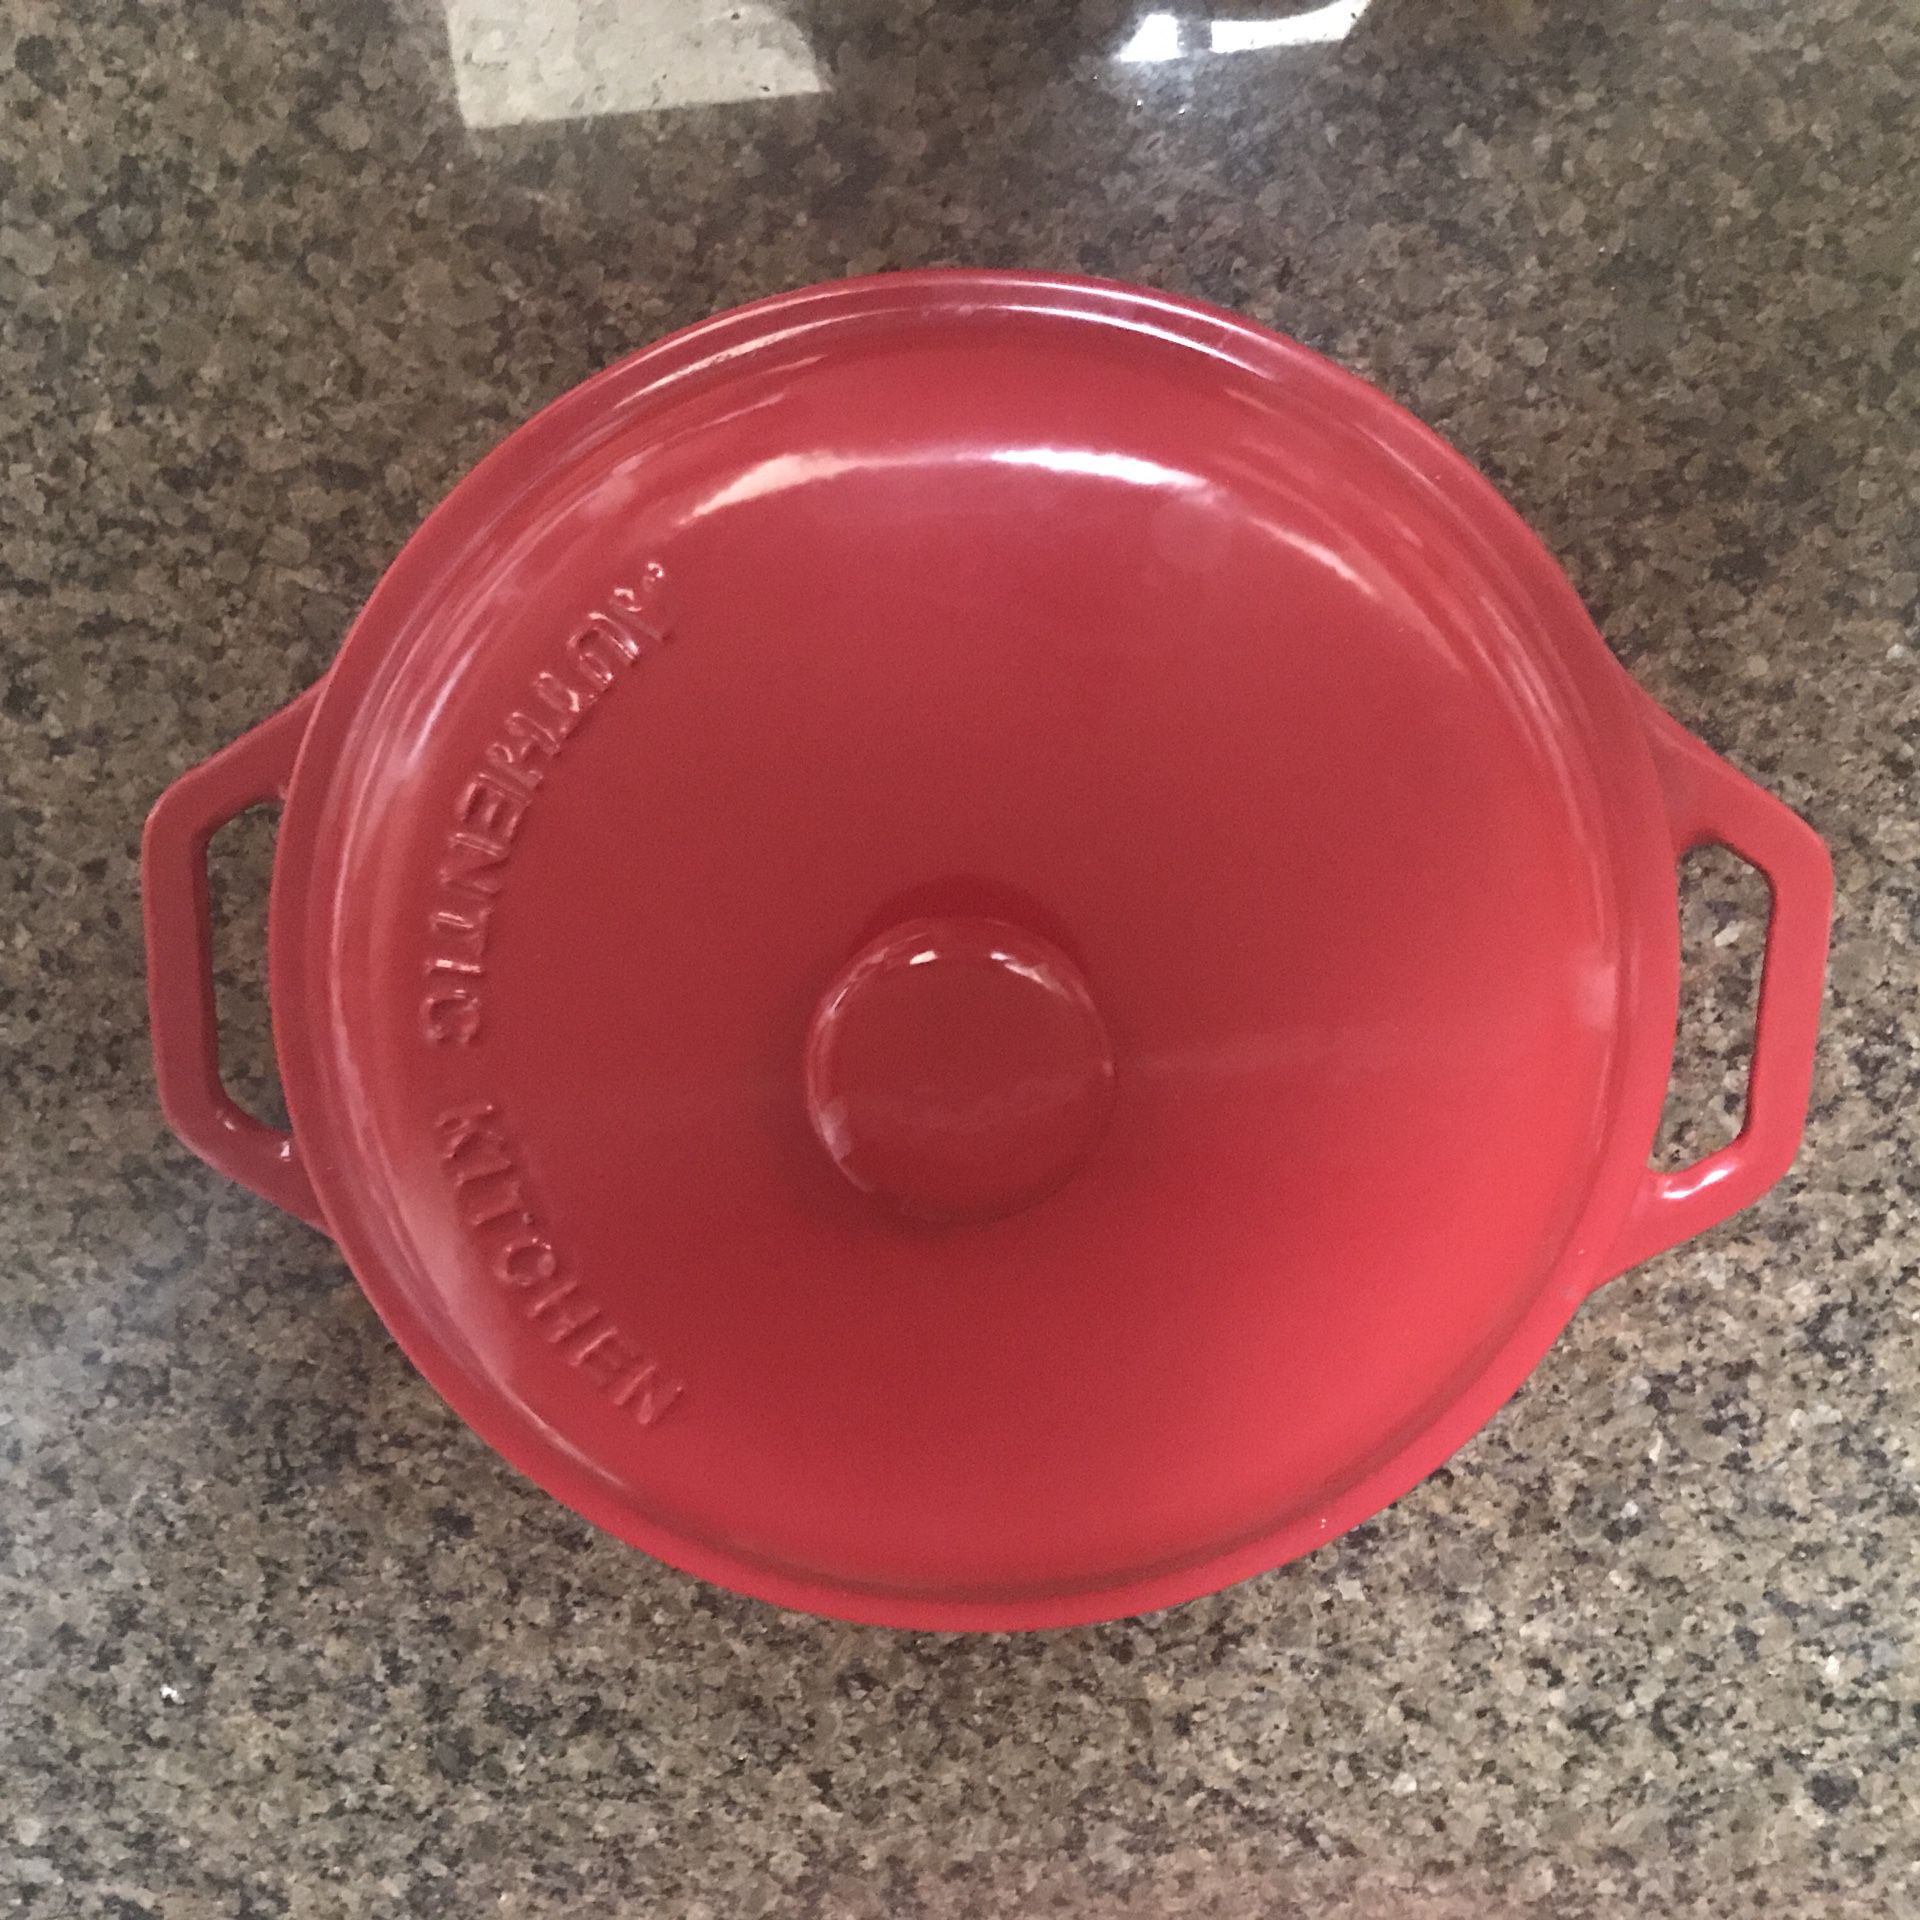 Tramontina Enameled Cast Iron Dutch Oven, 2-pack Red for Sale in Tracy, CA  - OfferUp